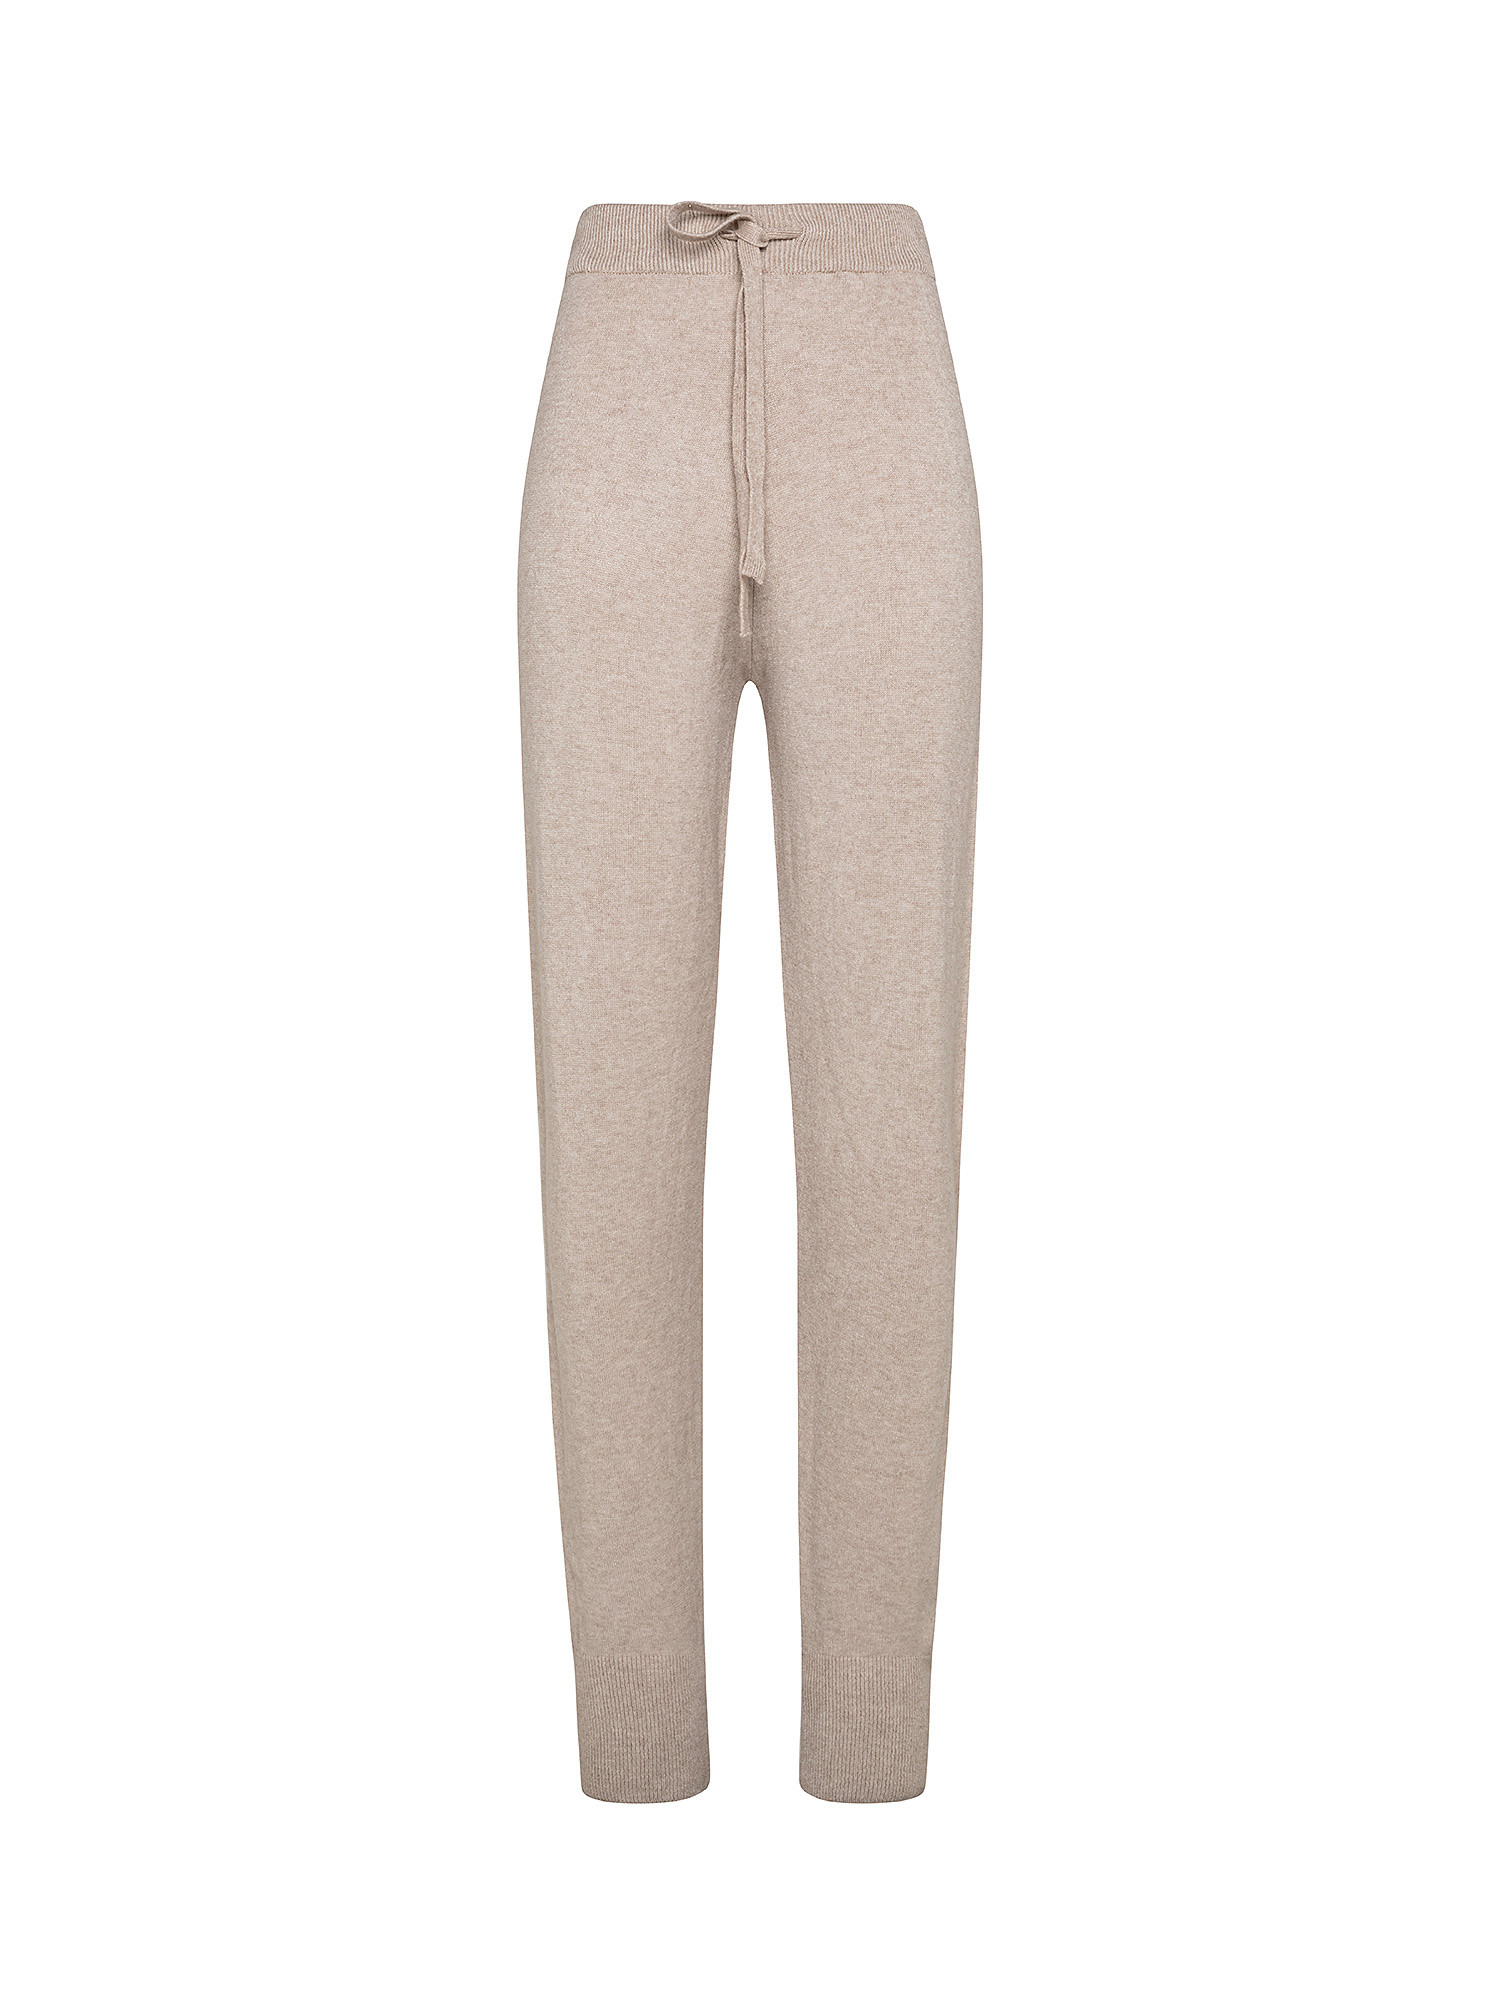 Pantalone in maglia, Beige, large image number 0